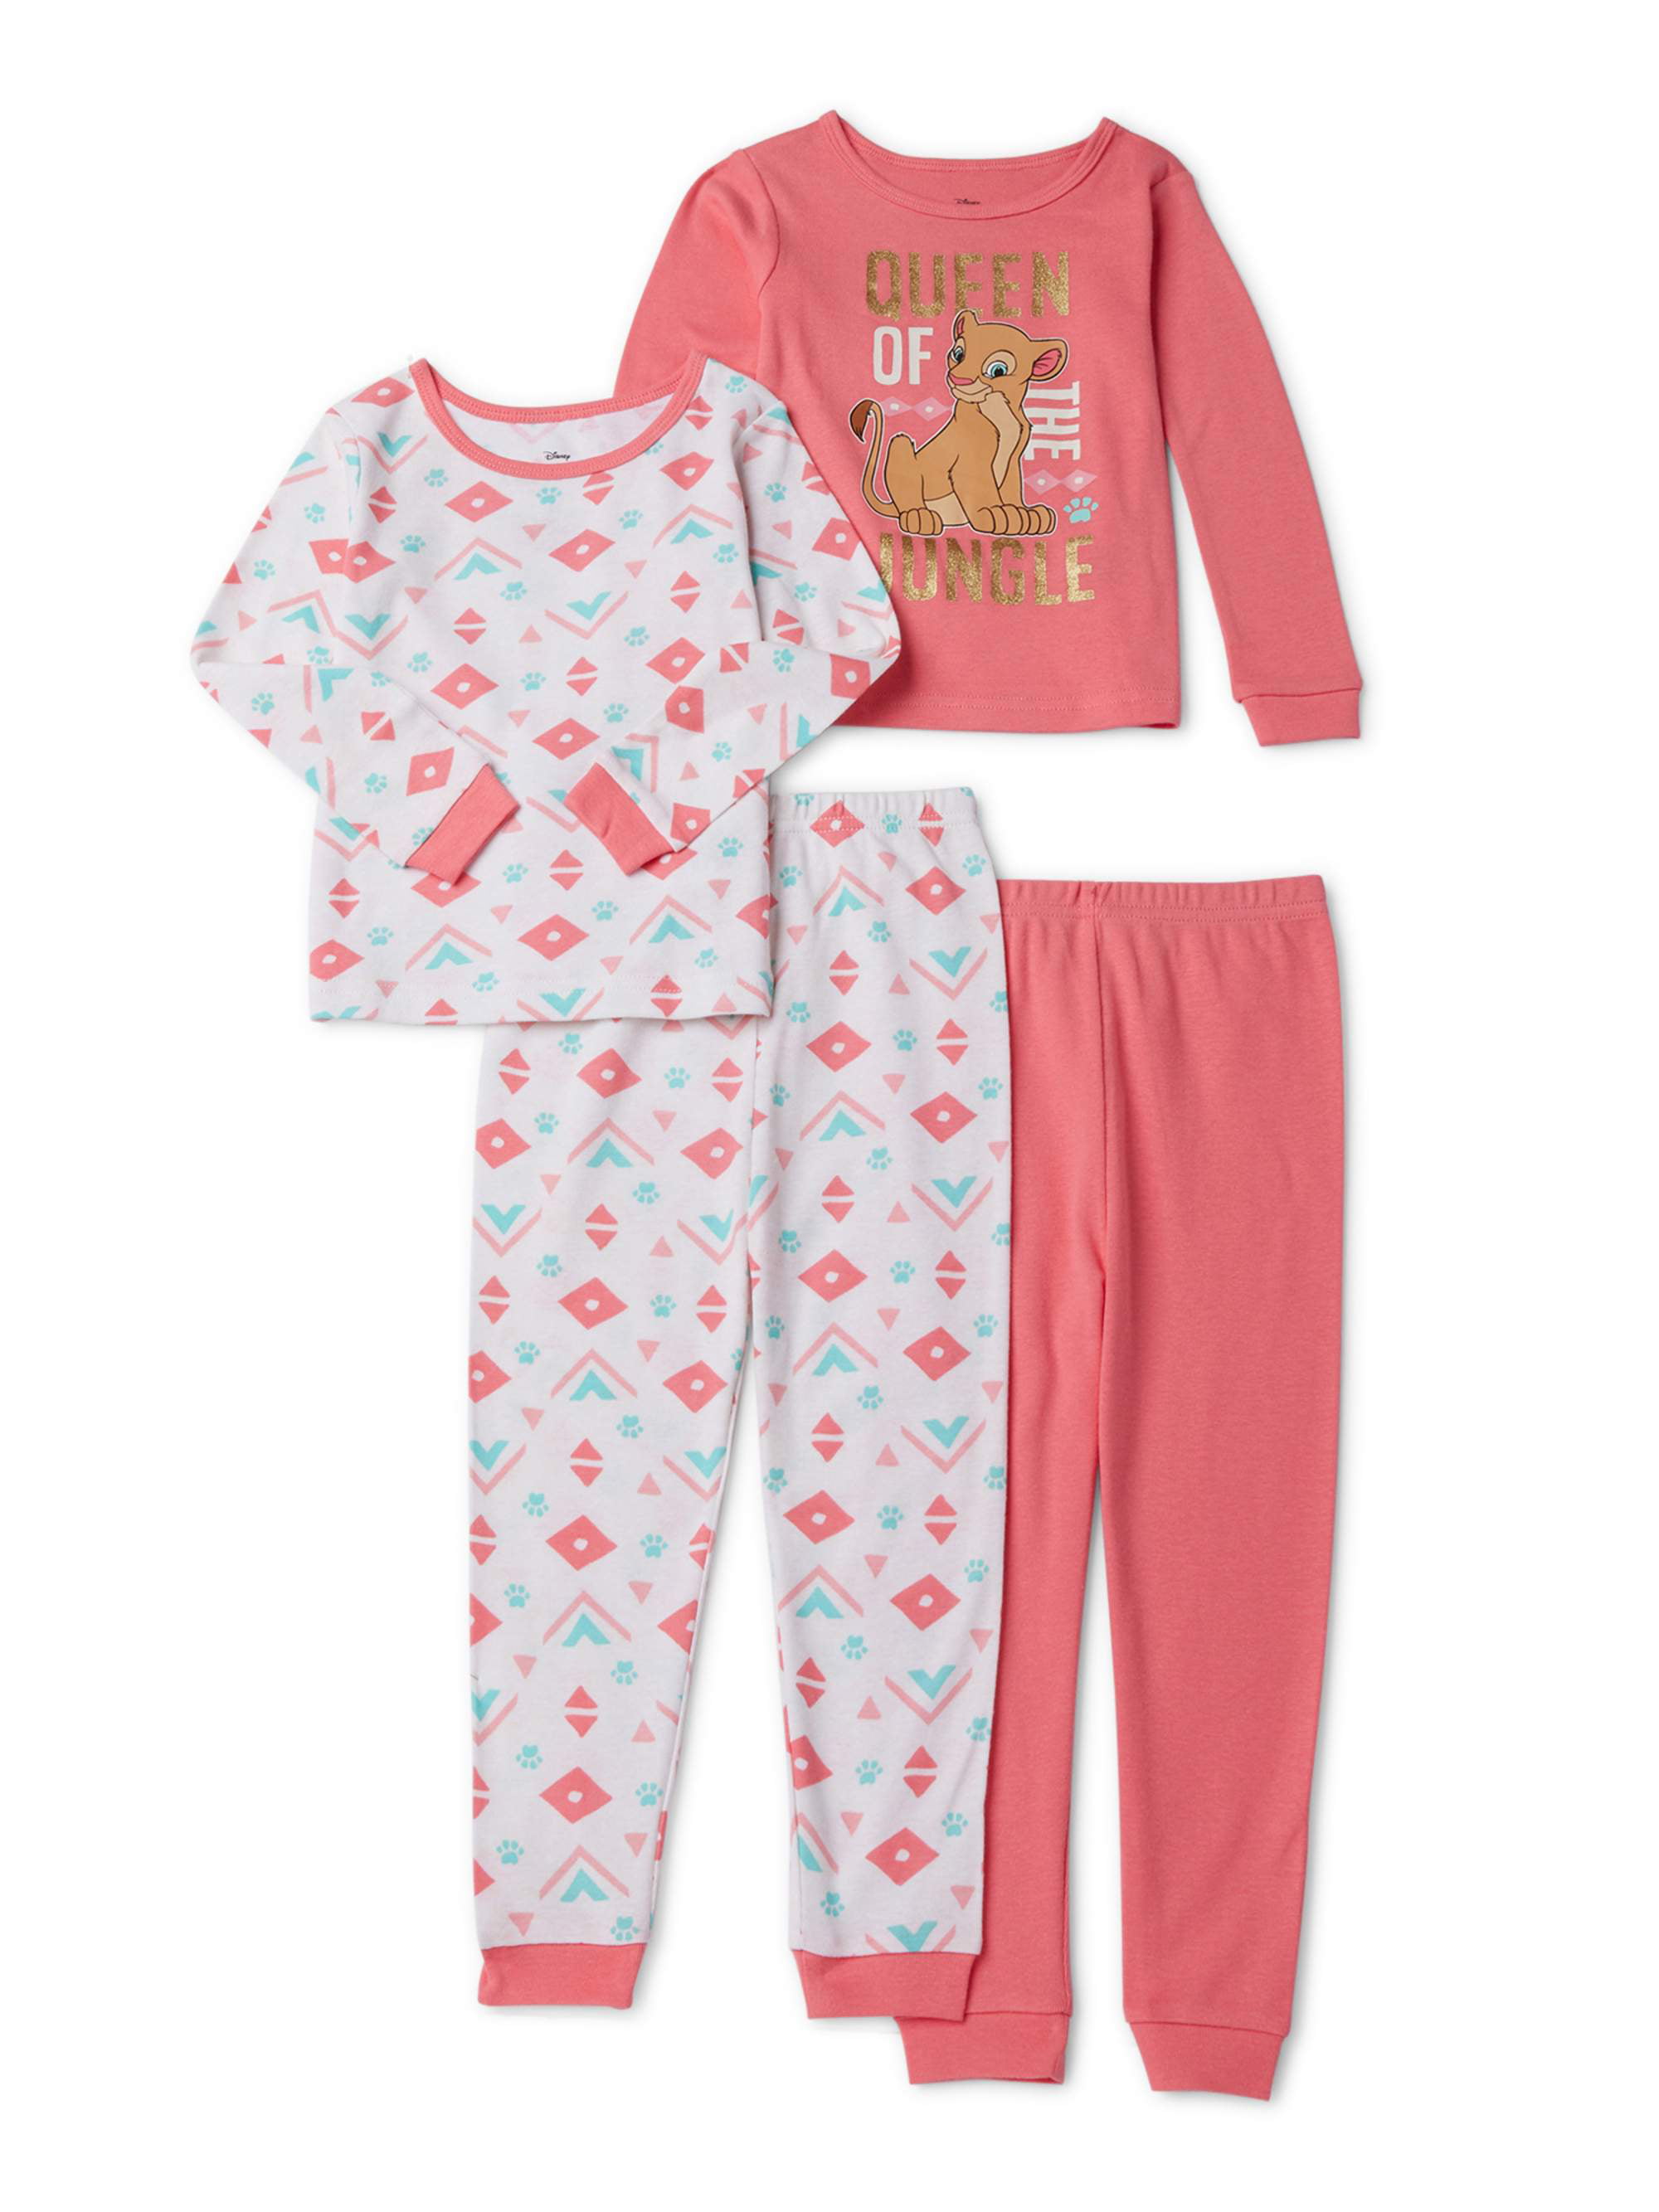 The Lion King Pajamas for Toddlers Nala Queen of the Jungle 2-Piece PJ Set 4T 